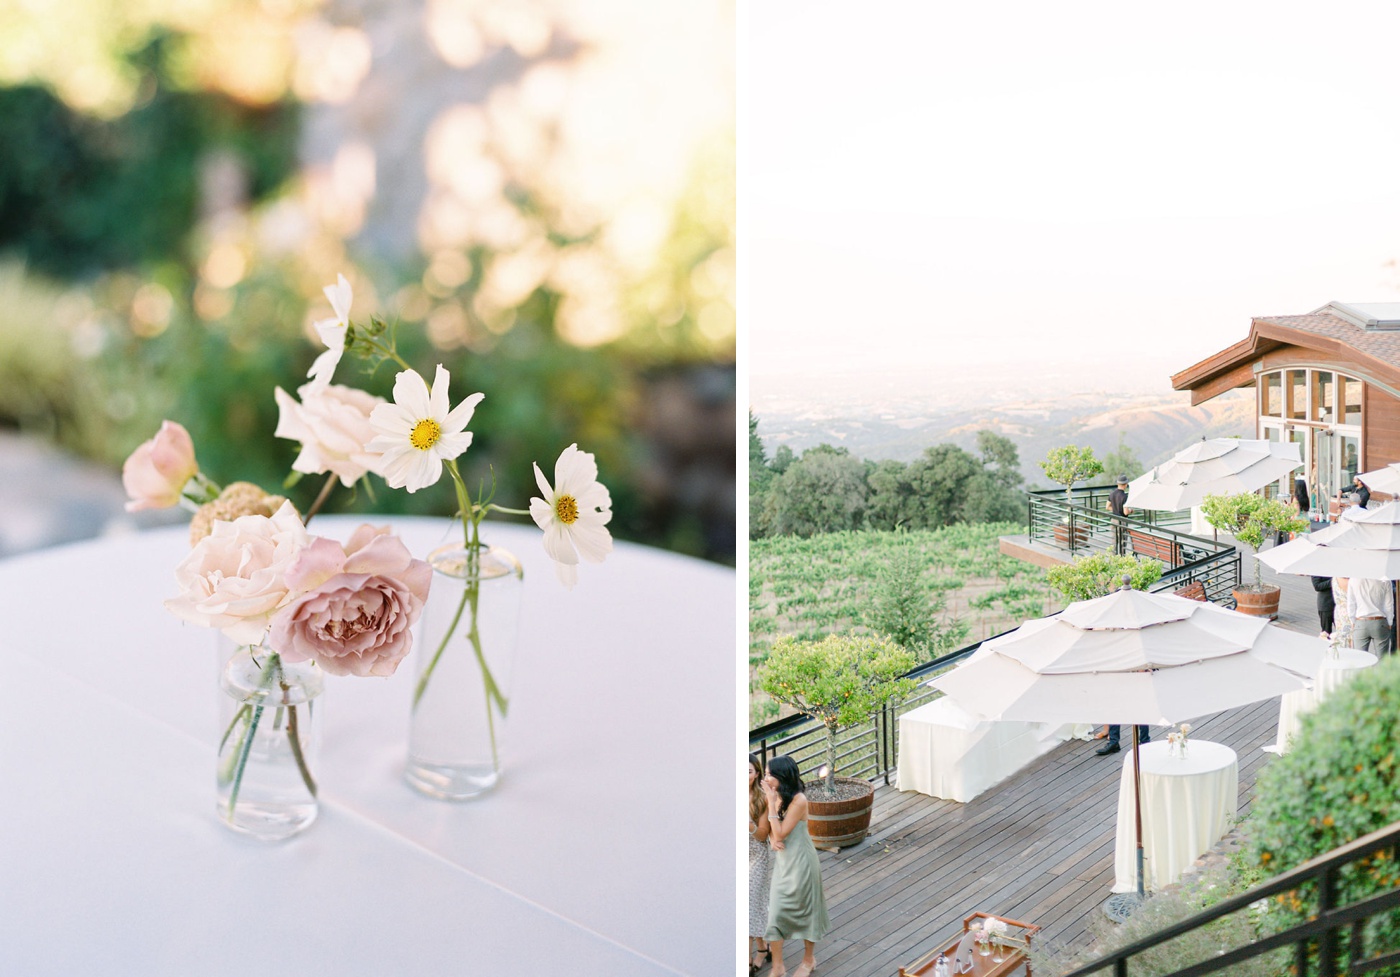 Outdoor reception at Thomas Fogarty Winery